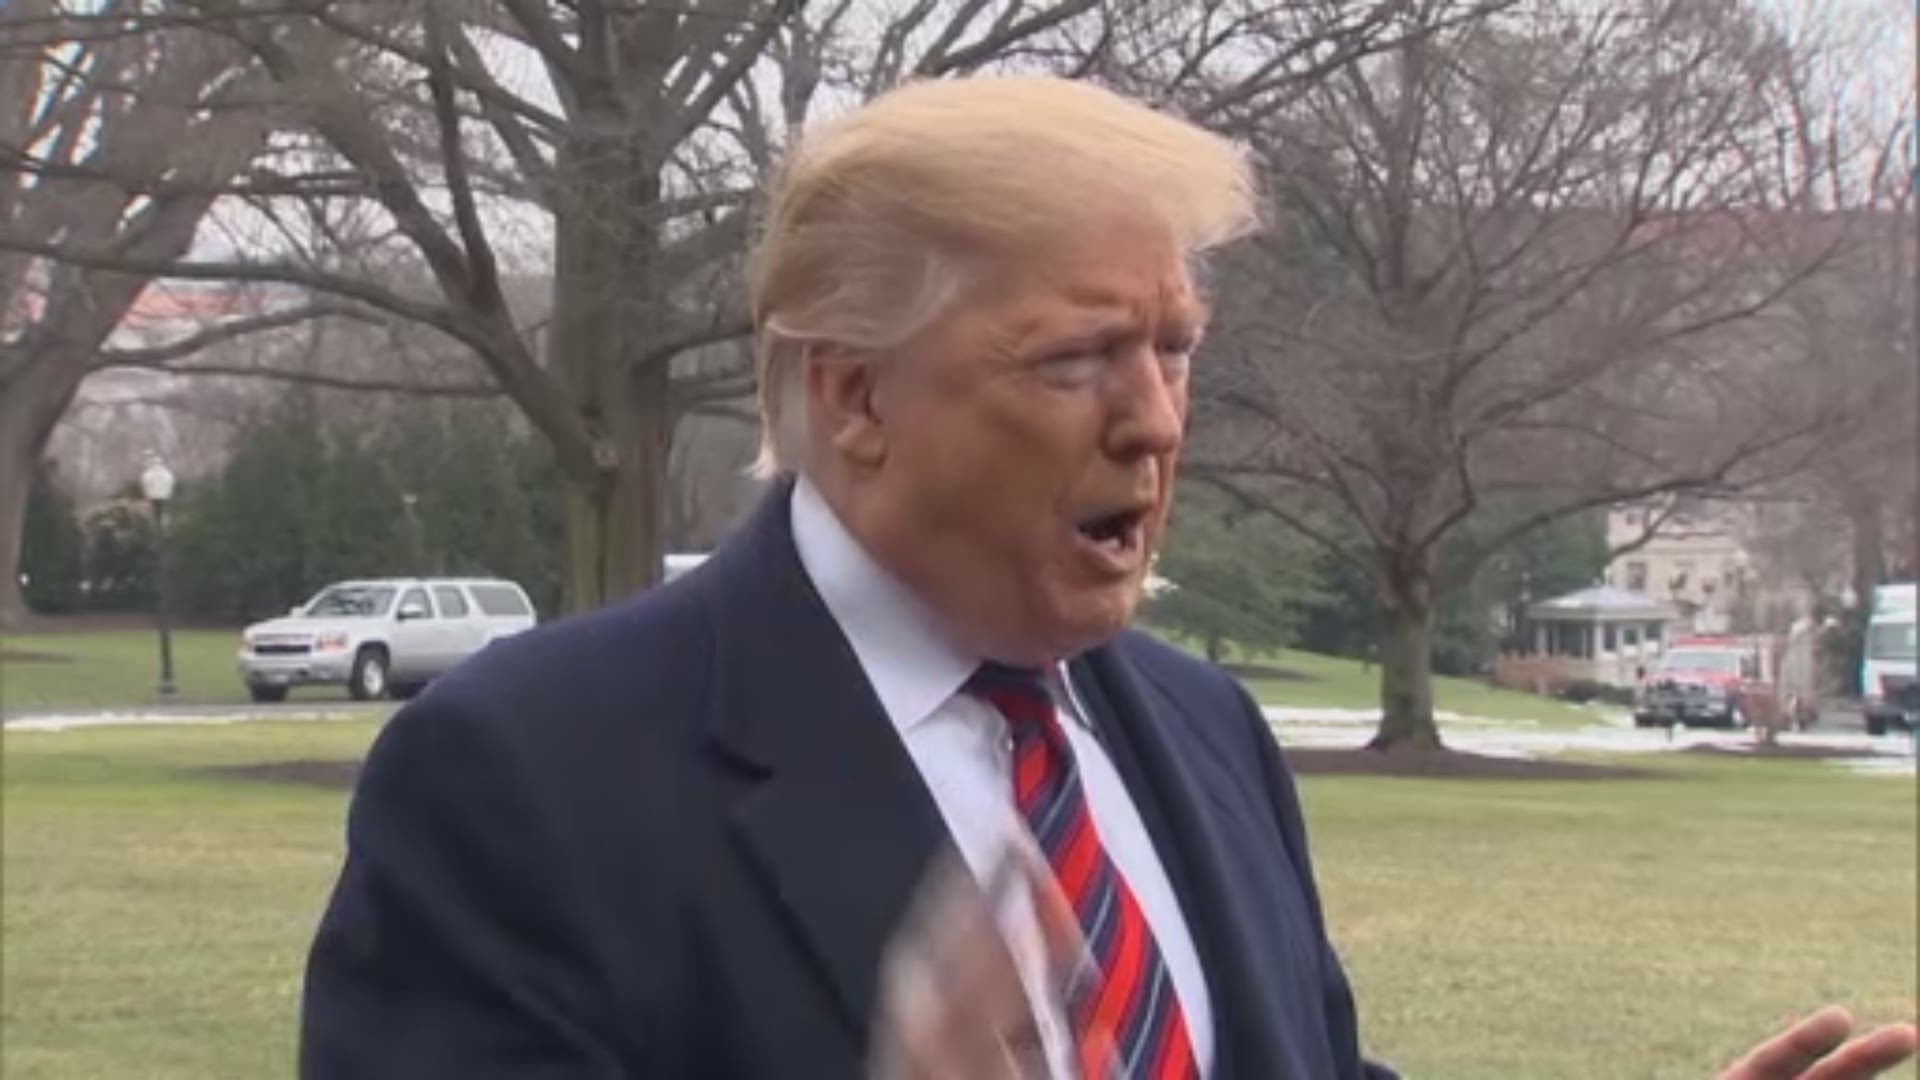 President Trump speaks to reporters ahead of Saturday's announcement about the border and the government shutdown.